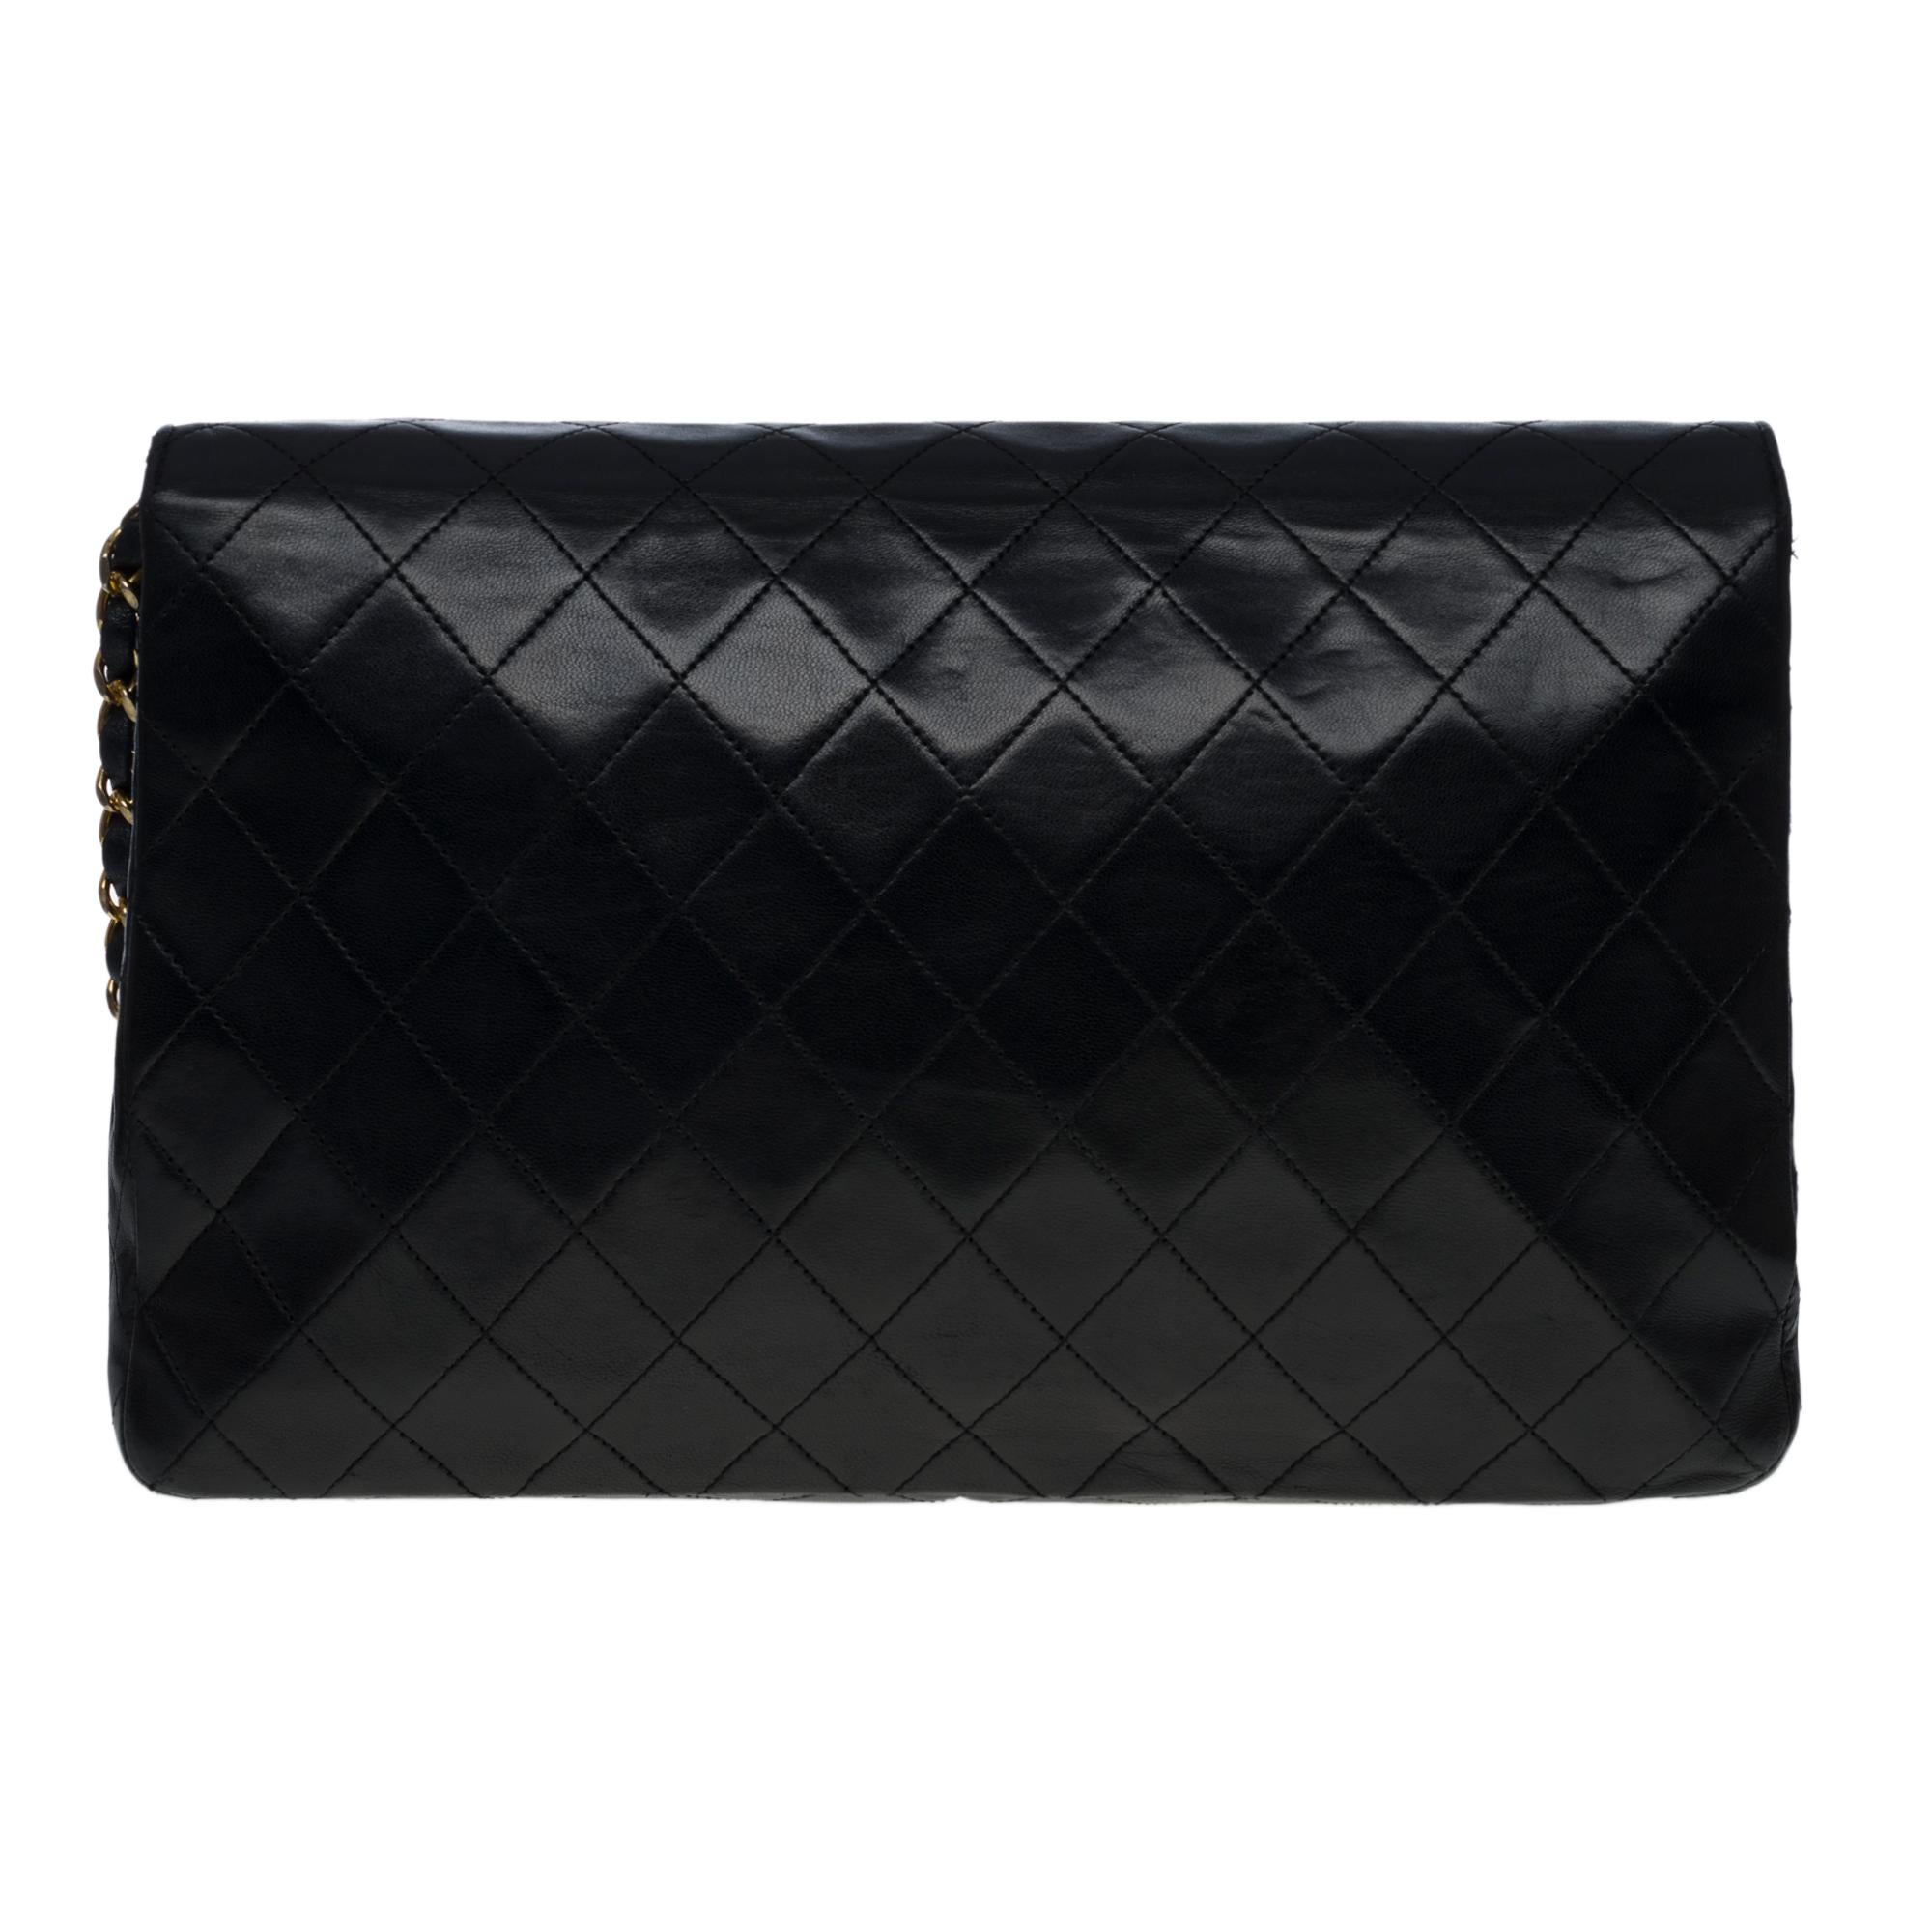 Beautiful Chanel Classic Flap bag in black quilted lambskin leather, gold-plated metal hardware, a gold-plated metal chain handle interlaced with black leather for shoulder and shoulder strap
Half-moon flap closure, gold-plated CC clasp
Single